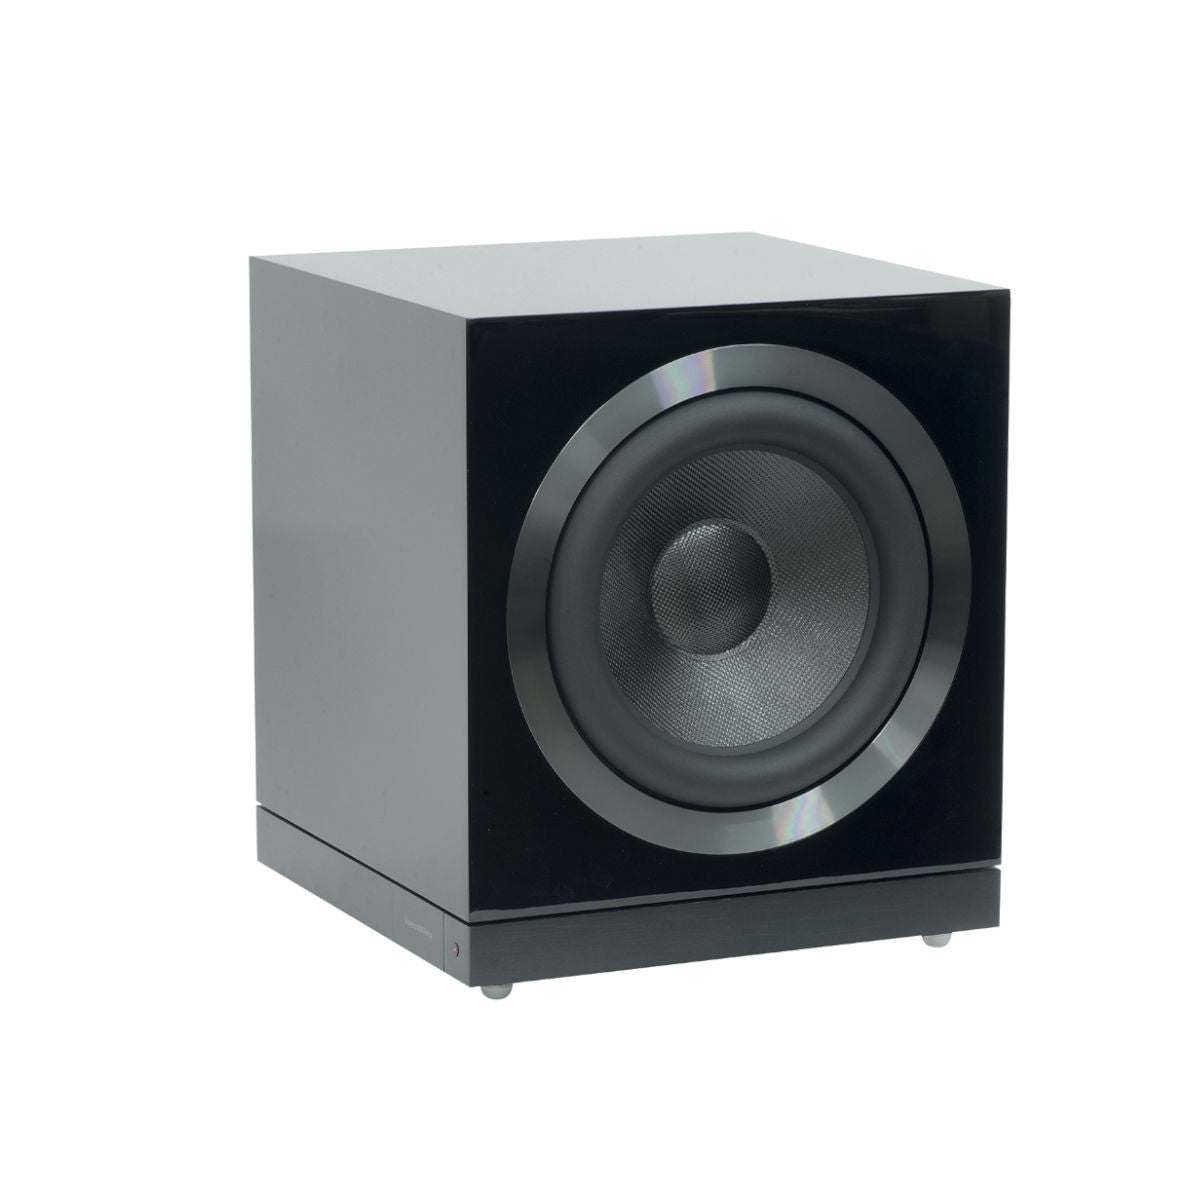 Bowers & Wilkins (B&W) DB1D Powered Subwoofer - Ooberpad